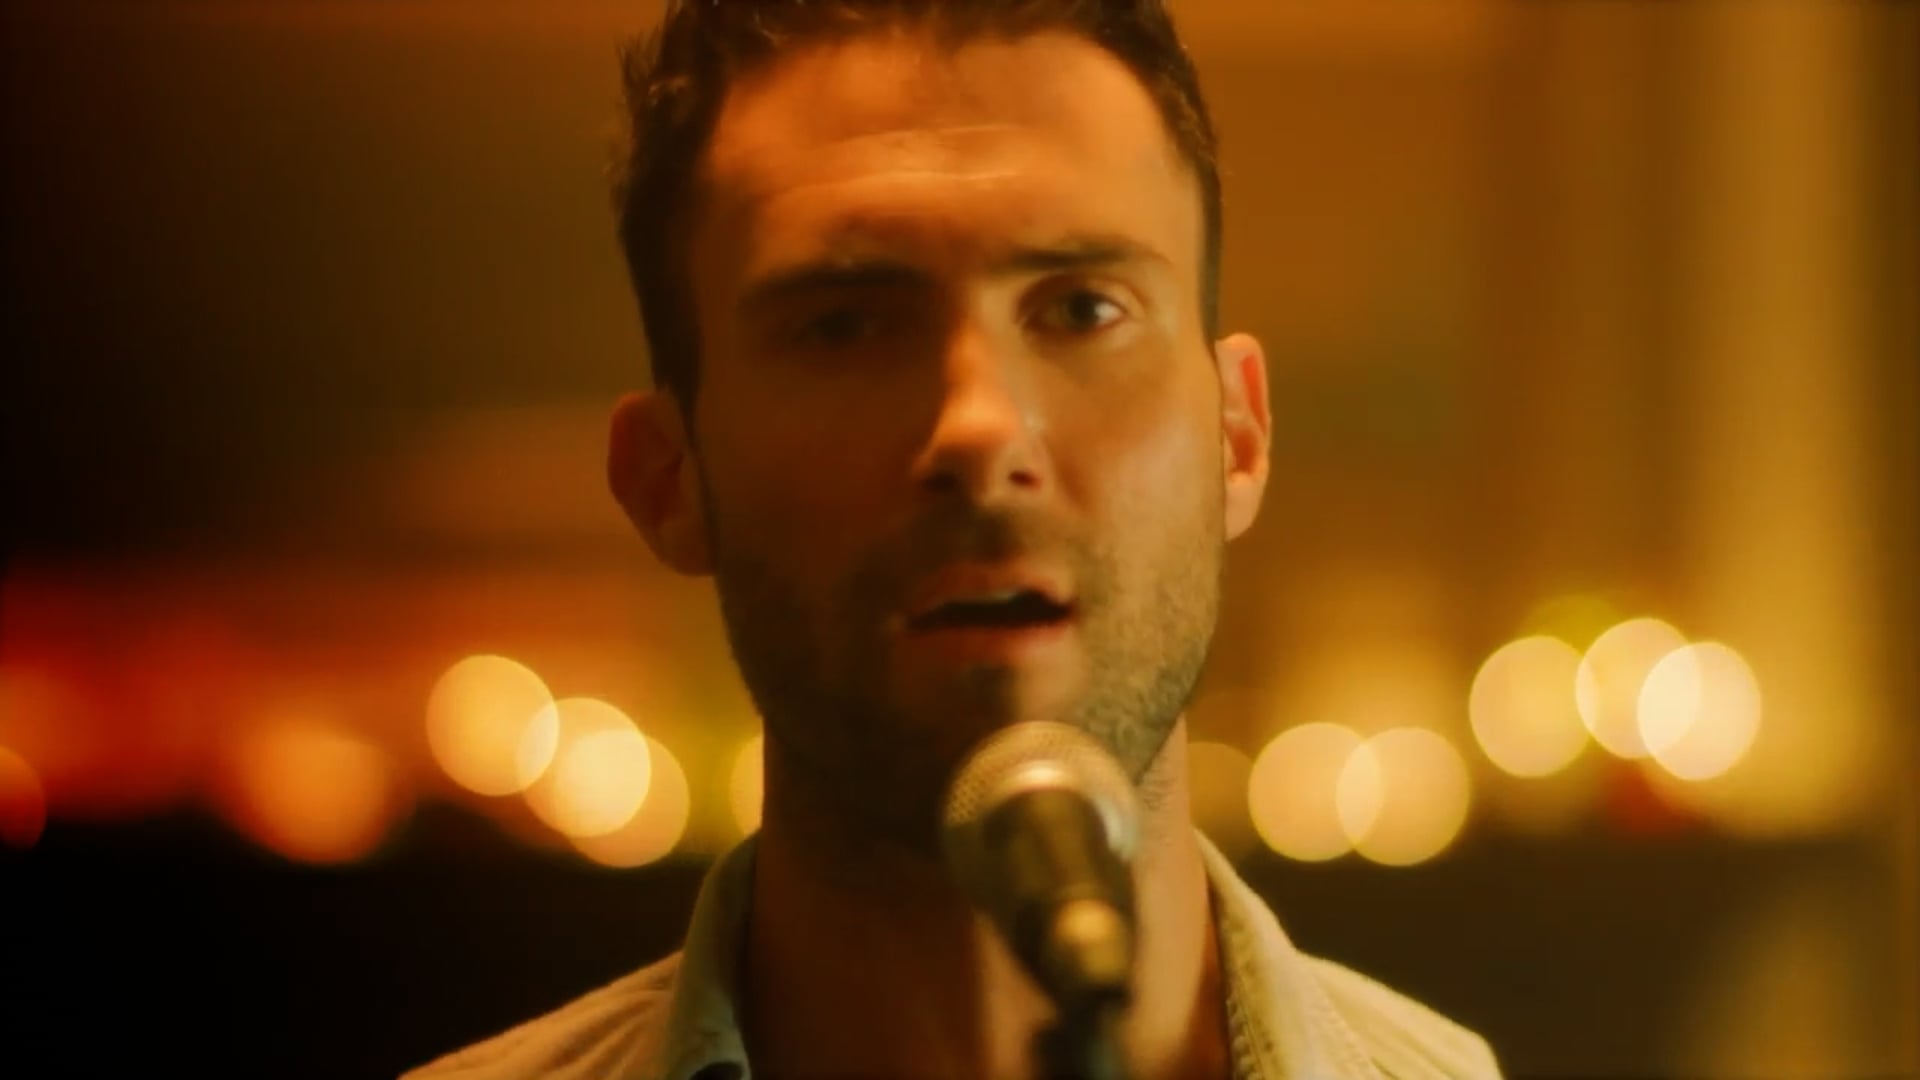 MAROON 5 "Give A Little More"